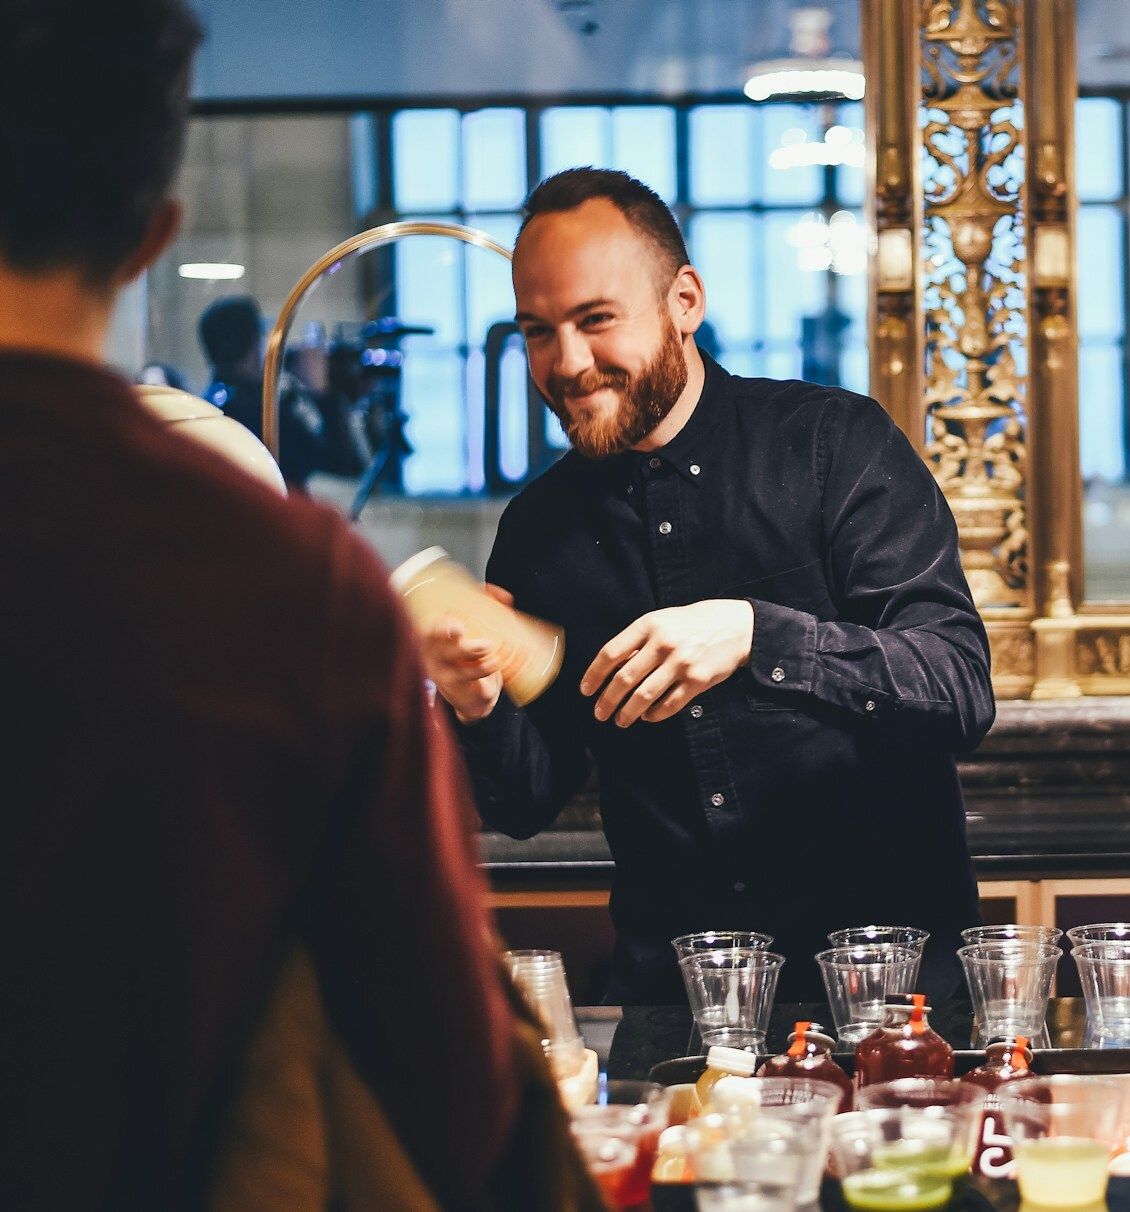 Smiling bartender engaging with a customer while expertly mixing a drink behind a bar adorned with a variety of colourful cocktail ingredients, reflecting skilled mixology and vibrant hospitality.